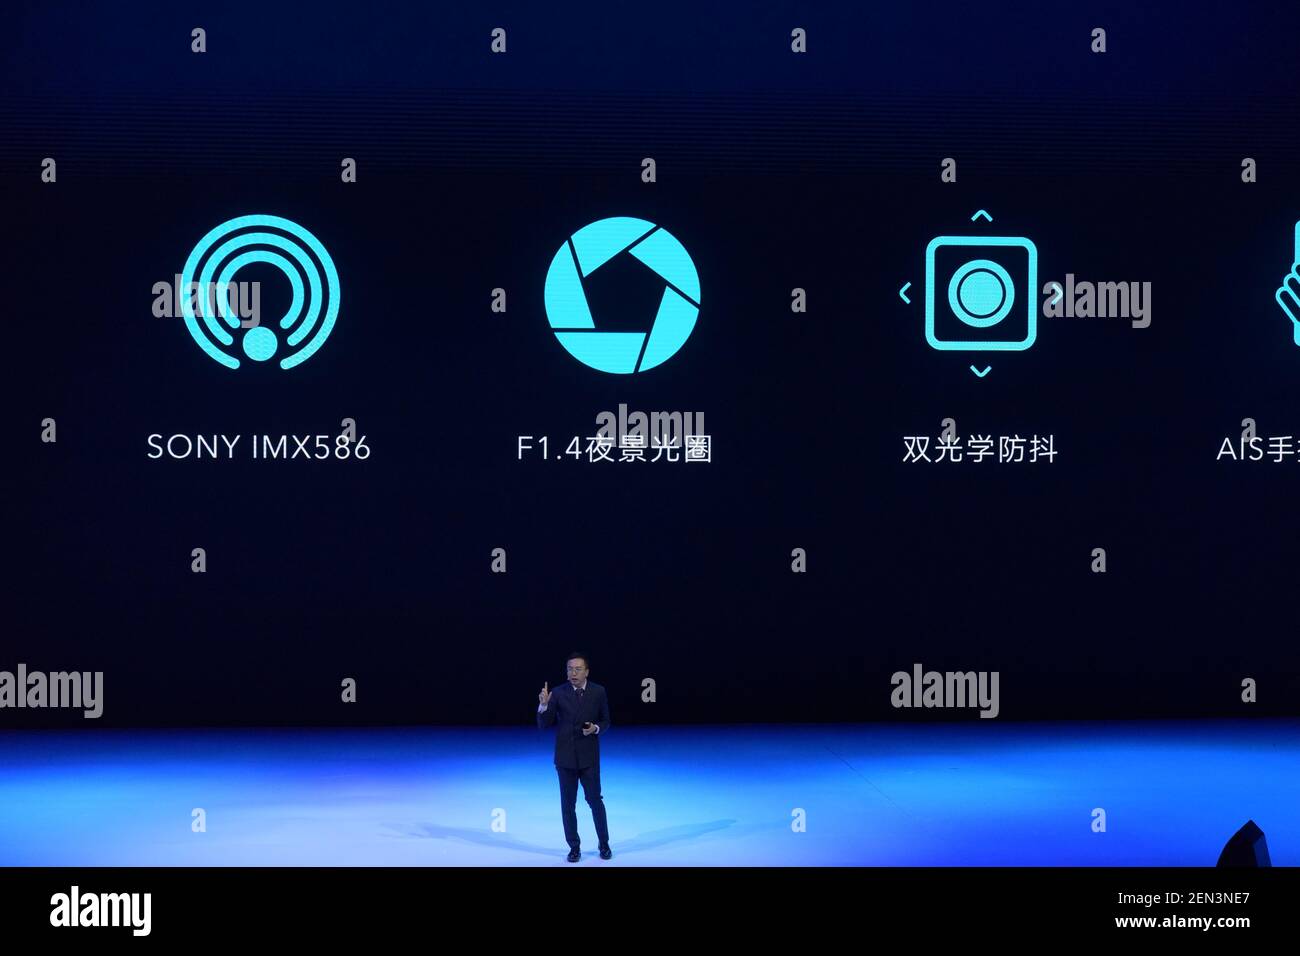 George Zhao Ming, president of Honor, the smartphone sub-brand of Huawei Technologies, introduces the Huawei Honor 20 and the Honor 20 Pro smartphones during the new product launch event in Shanghai, China, 31 May 2019. Huawei's Honor brand has unveiled its latest smartphones ¨C the Honor 20 and the Honor 20 Pro in its home market, China. The flagship models were first launched last week at an event in London. The launch event gave us the opportunity to get an in-depth knowledge of the specifications and features of both smartphones. The Honor 20 models both have a punch hole display like that Stock Photo